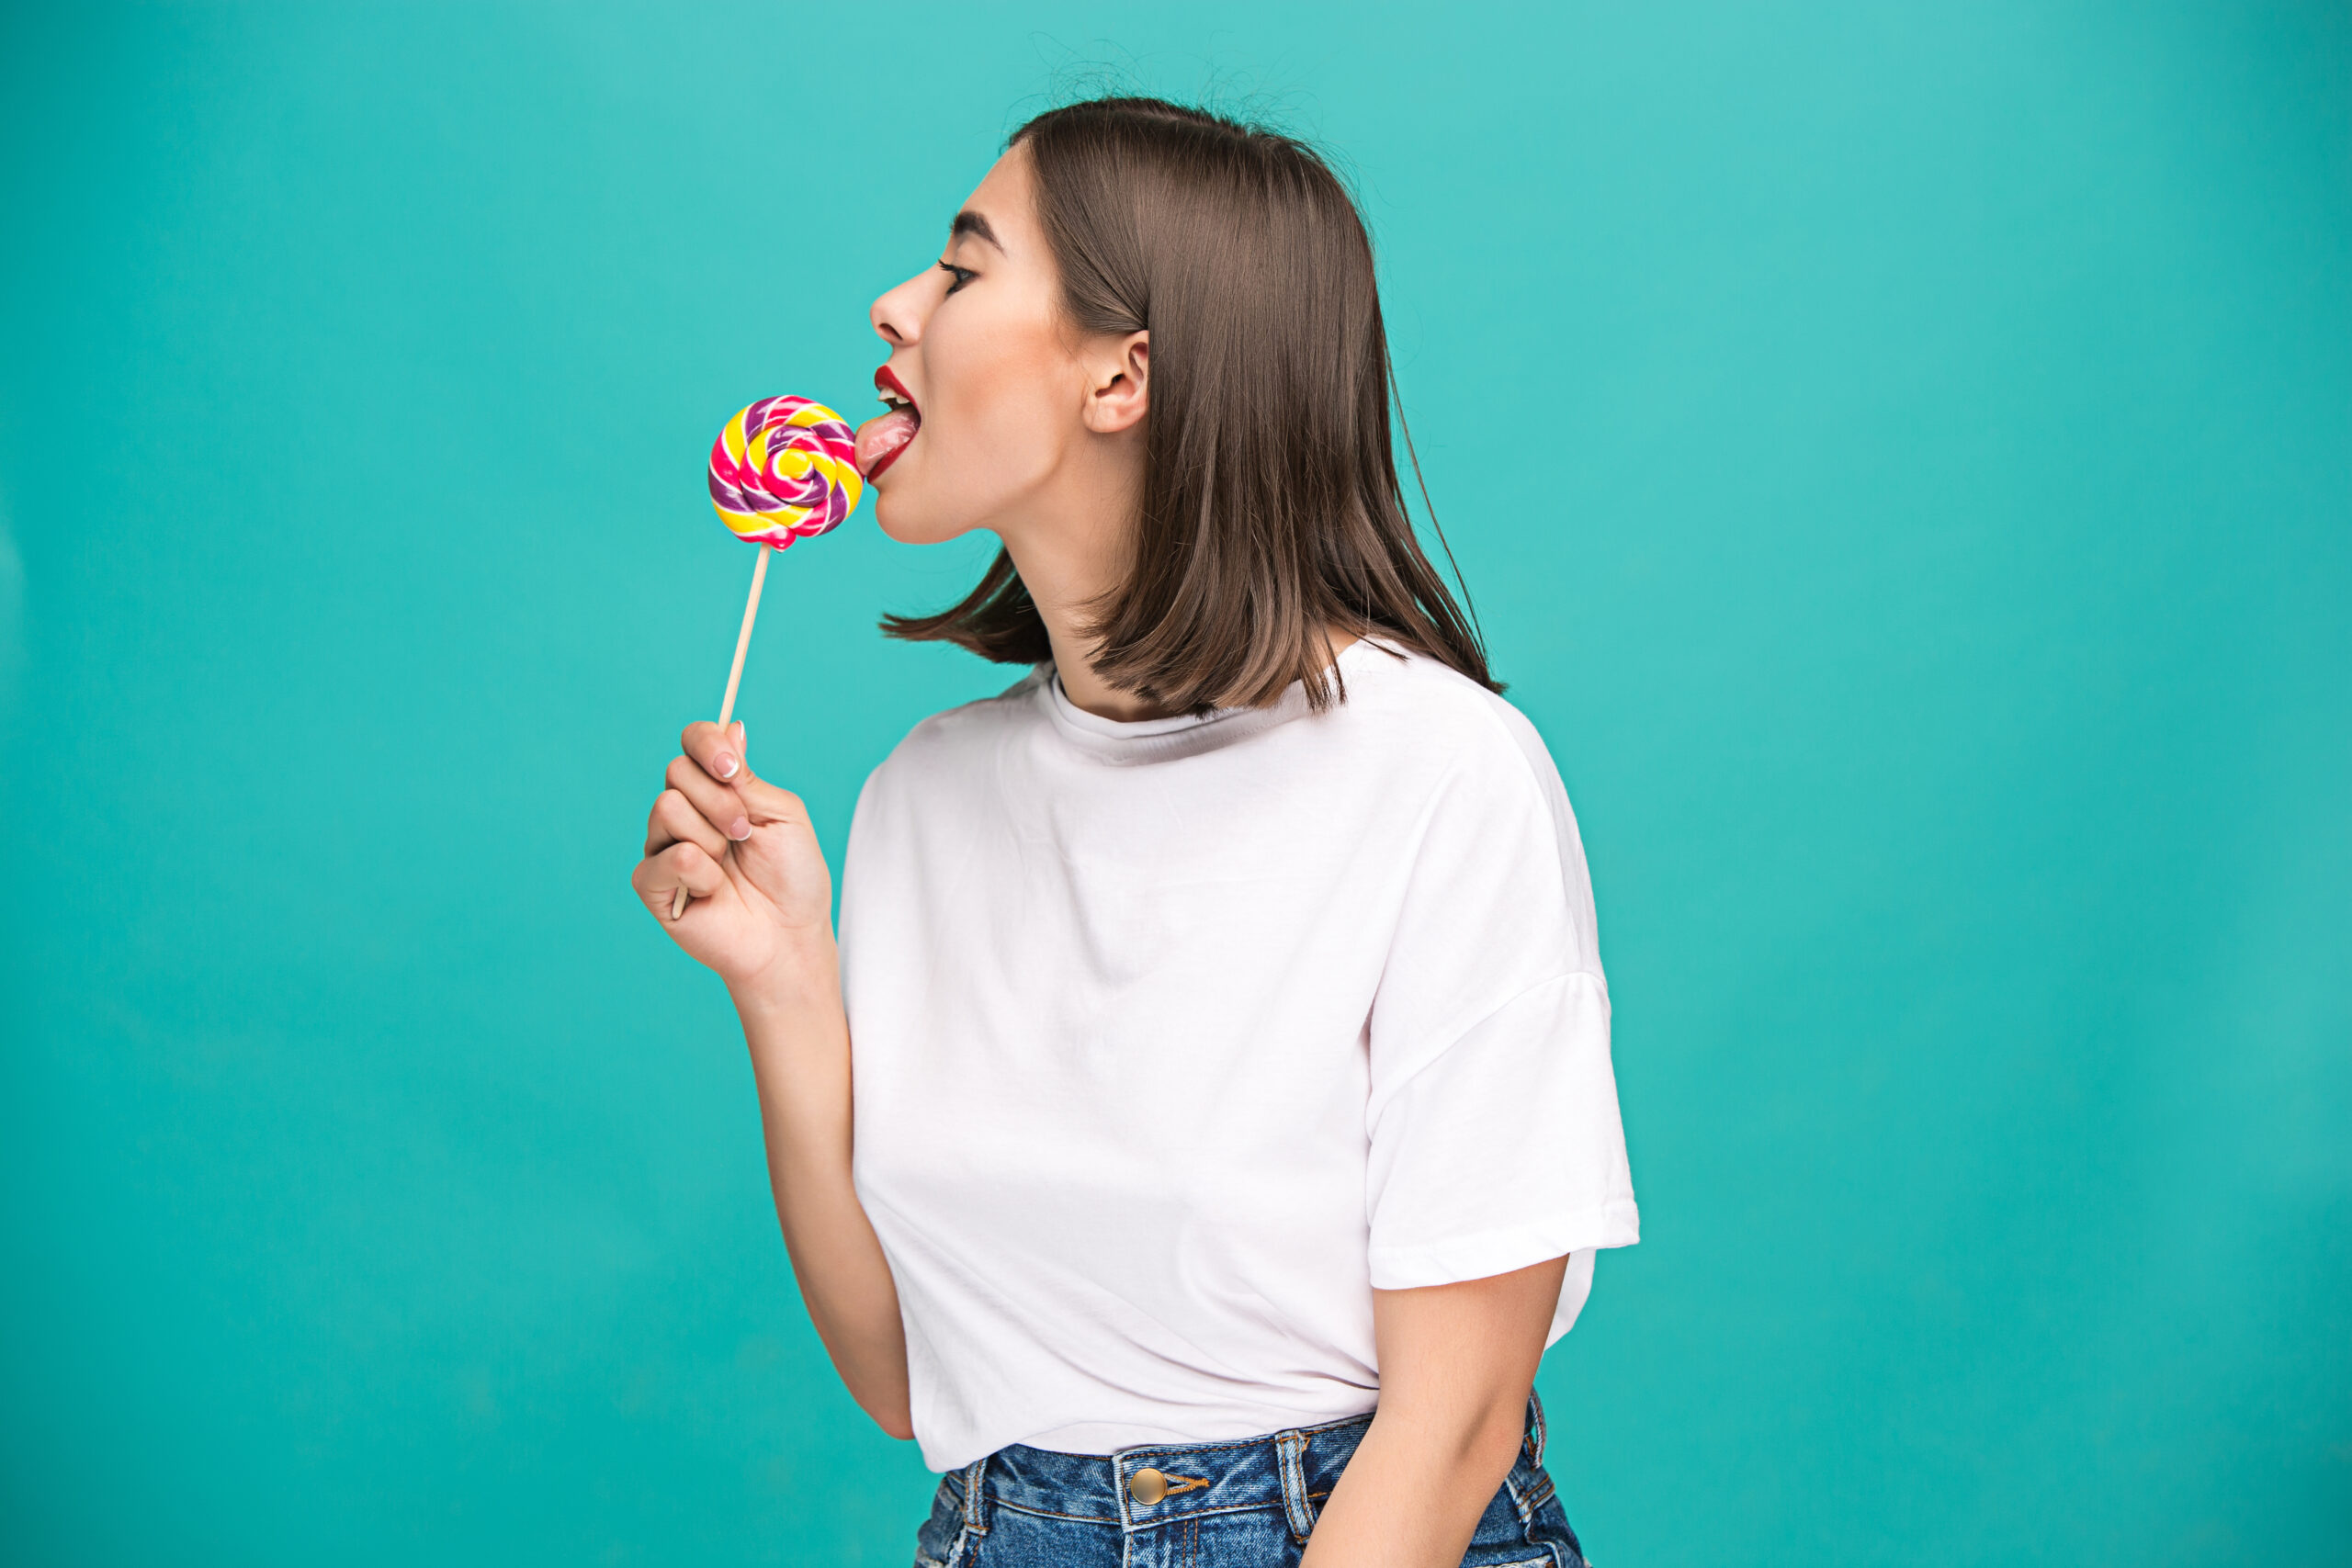 Know About The Different Reasons Behind The Sweet Taste In Your Mouth